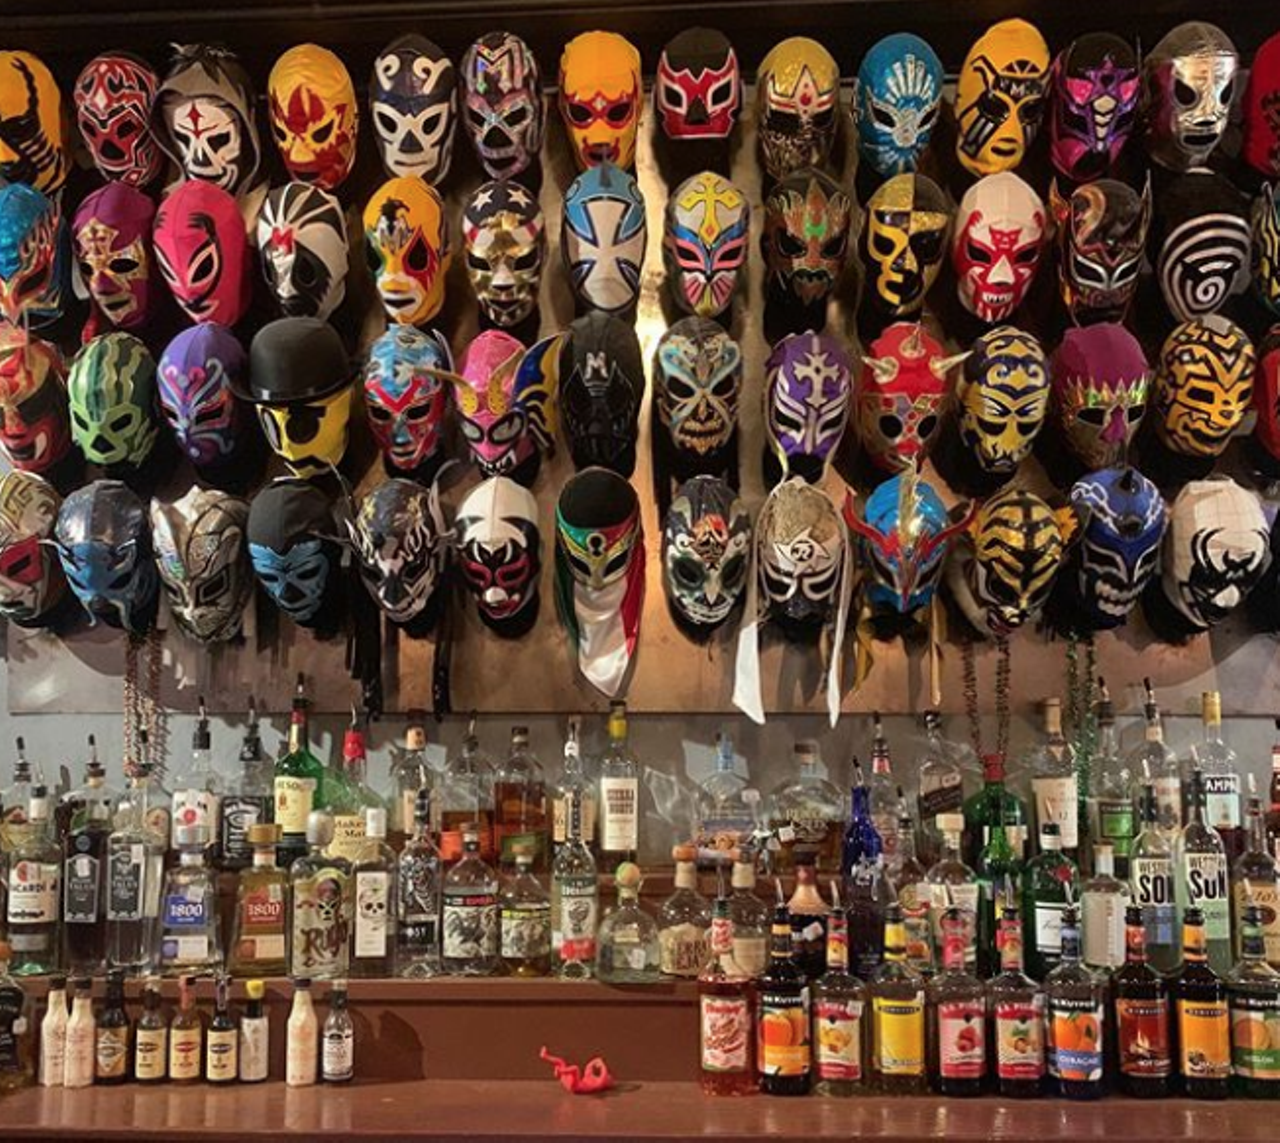 El Luchador
622 Roosevelt Ave, (210) 272-0016, facebook.com/luchadorbarsa
Of course the lucha-themed watering hole will come through with your hangover remedies. Although you may very well get drunk off your ass here, you can also sober up the next morning with a damn good michelada. You won’t be disappointed, fam.
Photo via Instagram / kaisertoro